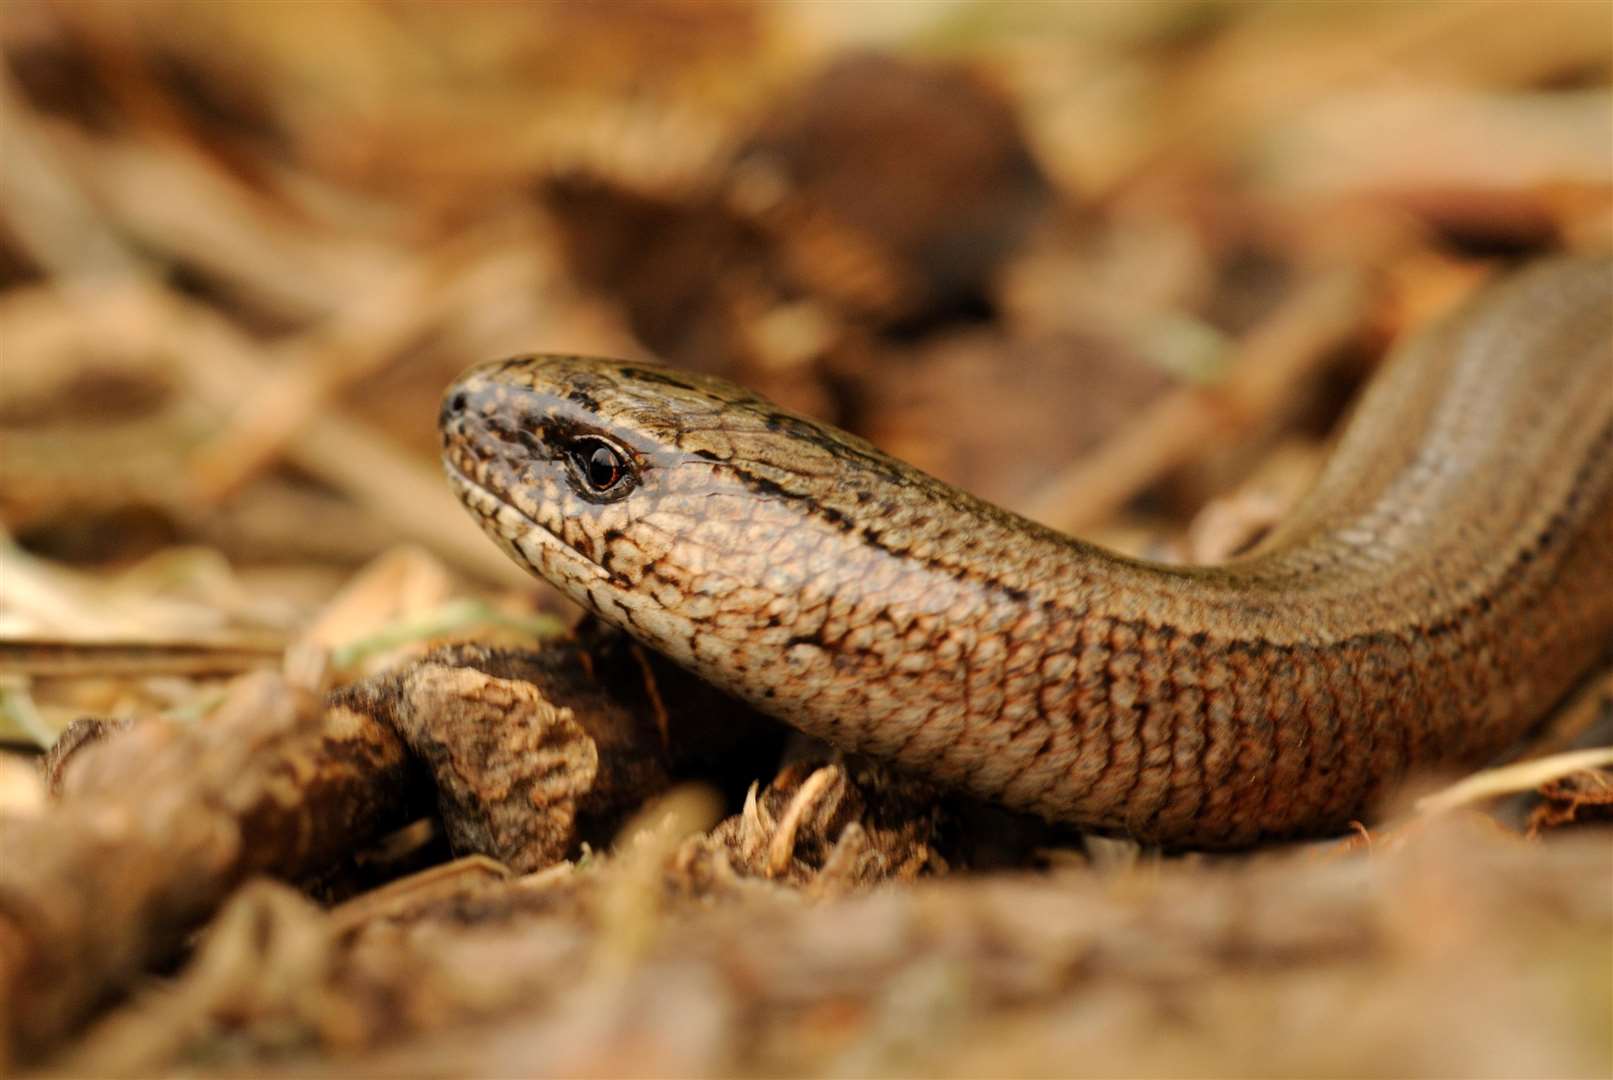 Developers are already obliged to carry out ecological surveys for the likes of slow worms